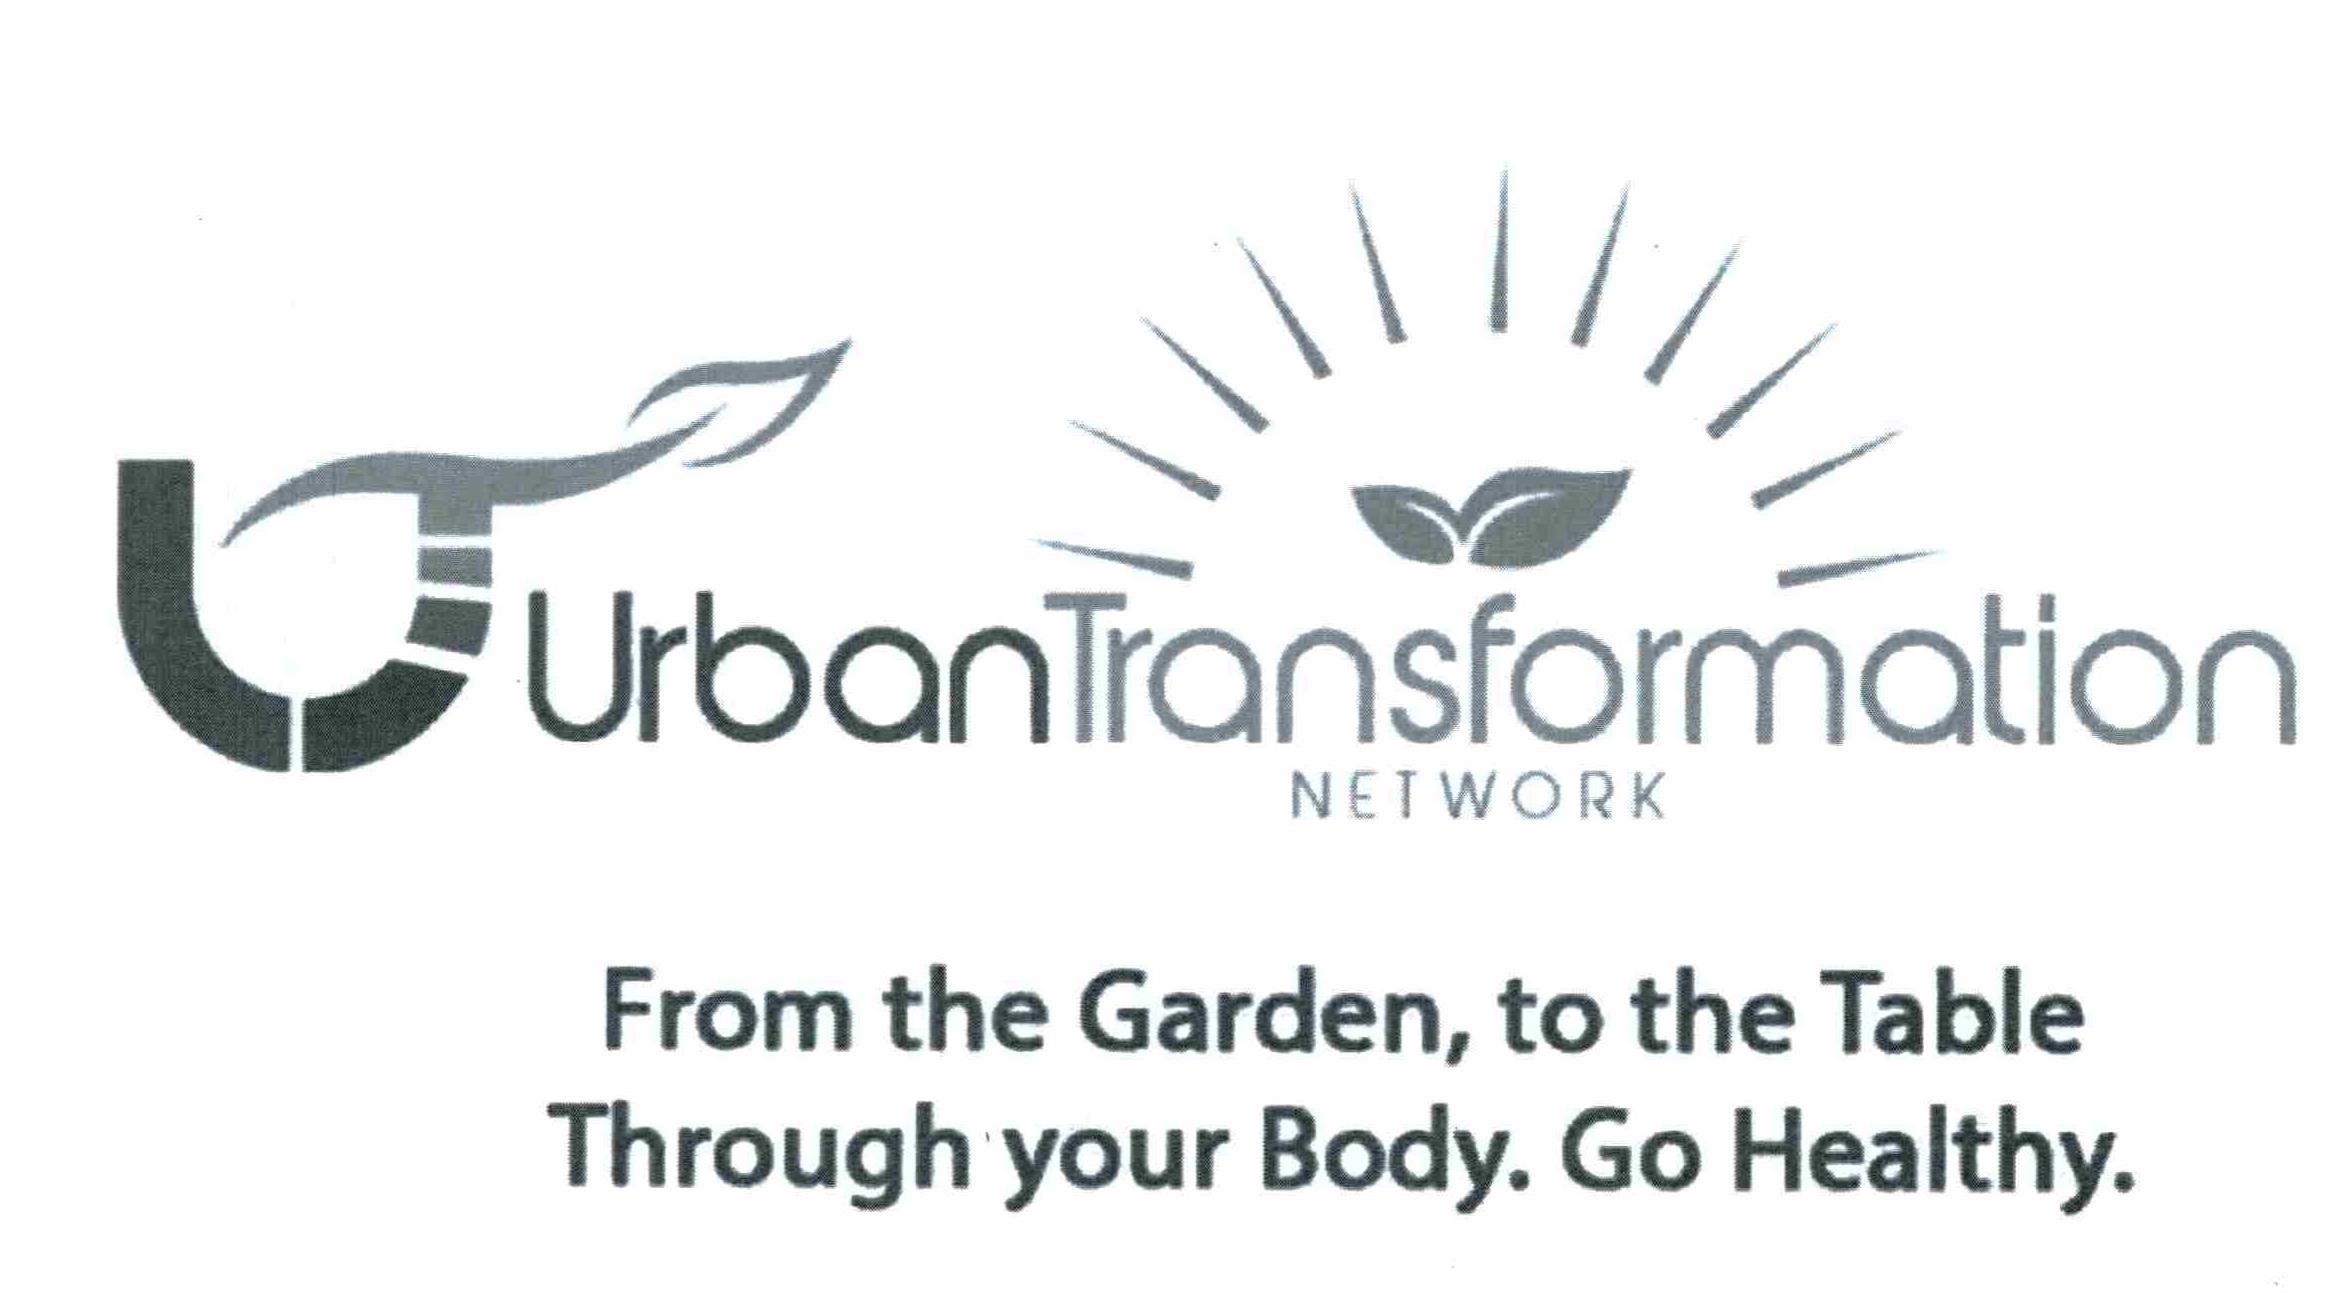  U URBANTRANSFORMATION NETWORK FROM THE GARDEN, TO THE TABLE THROUGH YOUR BODY. GO HEALTHY.